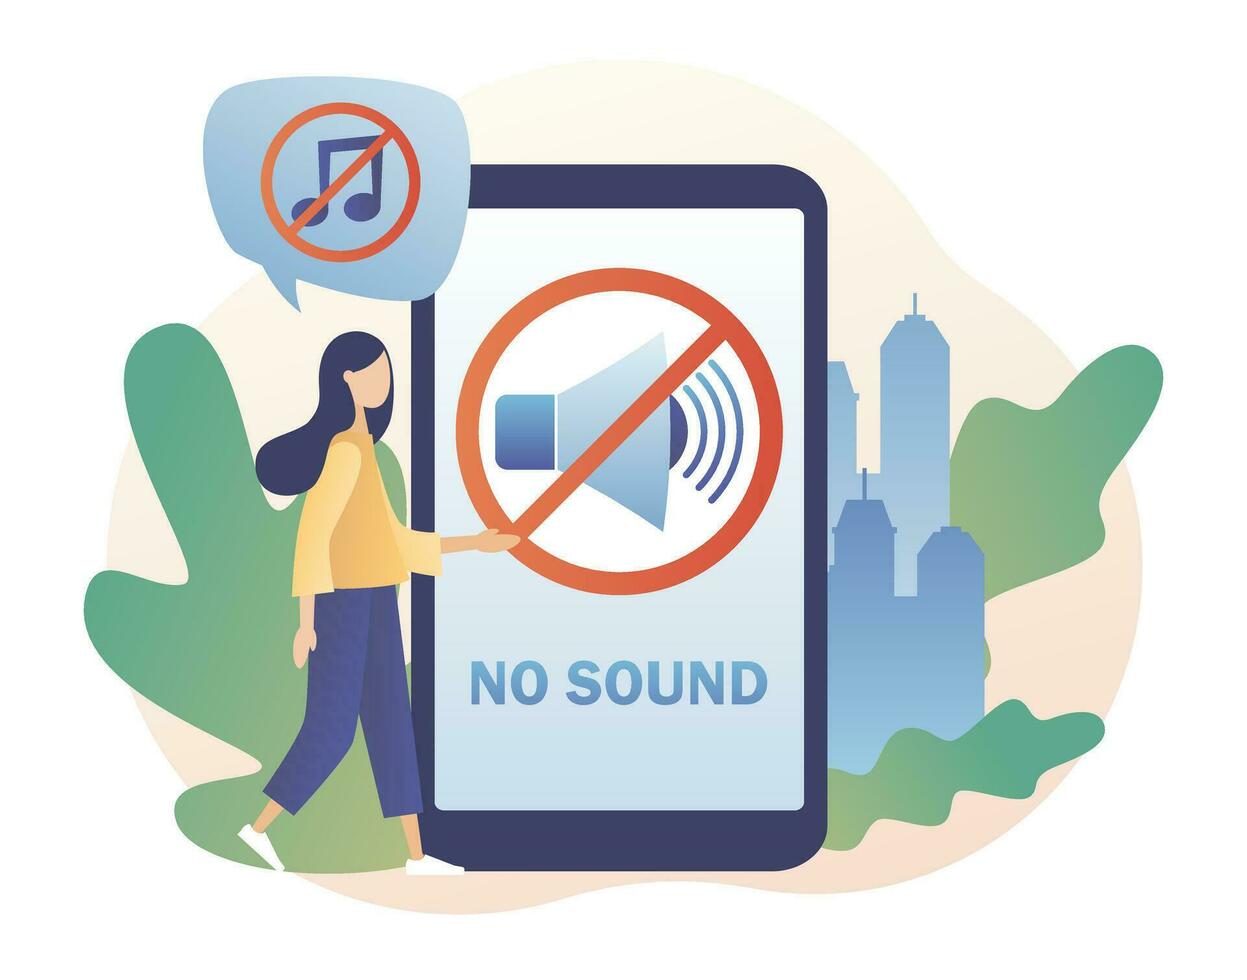 Volume off or mute mode sign for smartphone. No sound - text on smartphone screen. Quiet zone concept. Stop noise sign and tiny people. Modern flat cartoon style. Vector illustration